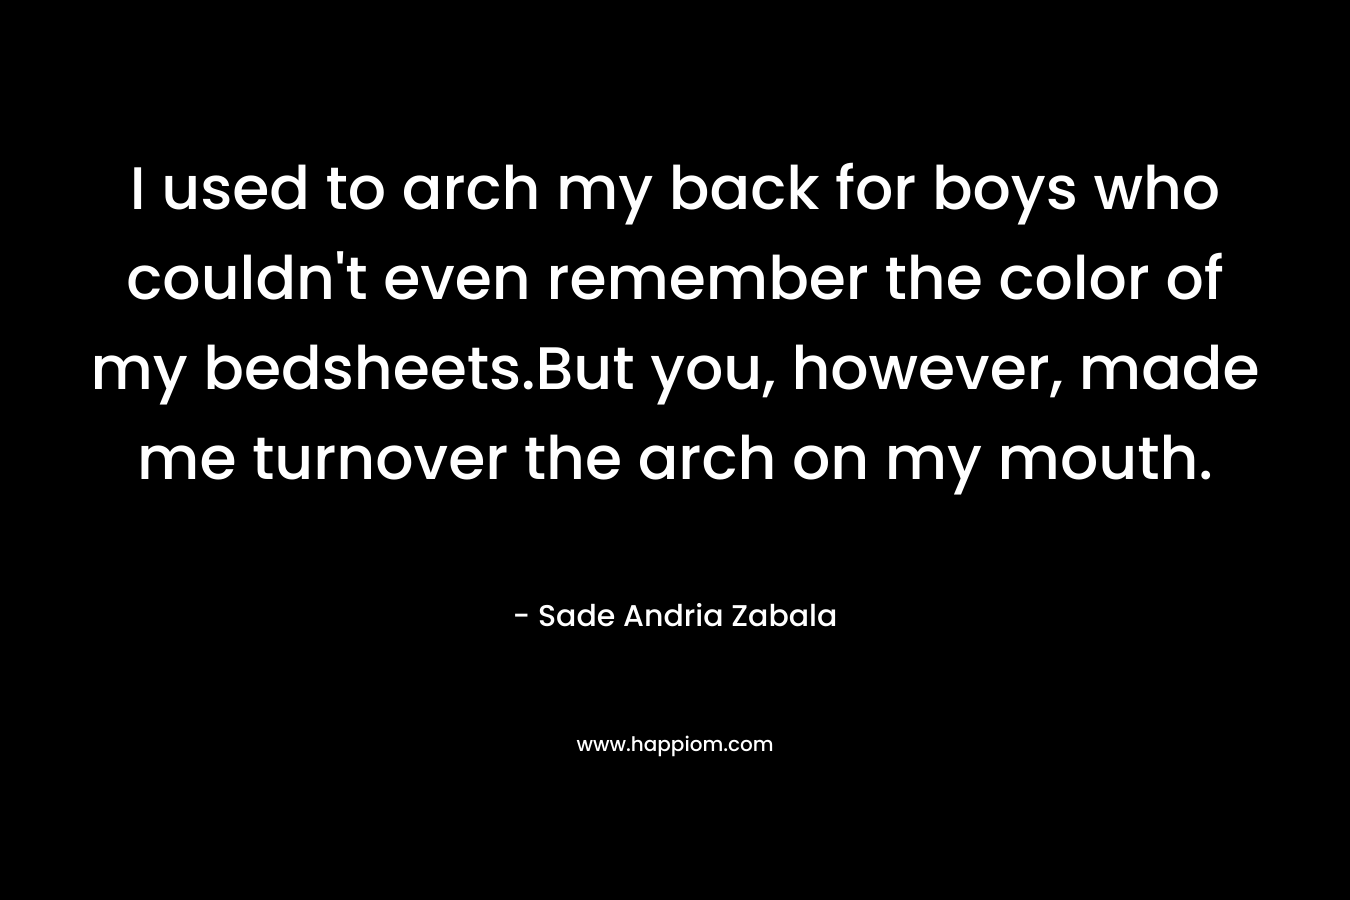 I used to arch my back for boys who couldn’t even remember the color of my bedsheets.But you, however, made me turnover the arch on my mouth. – Sade Andria Zabala